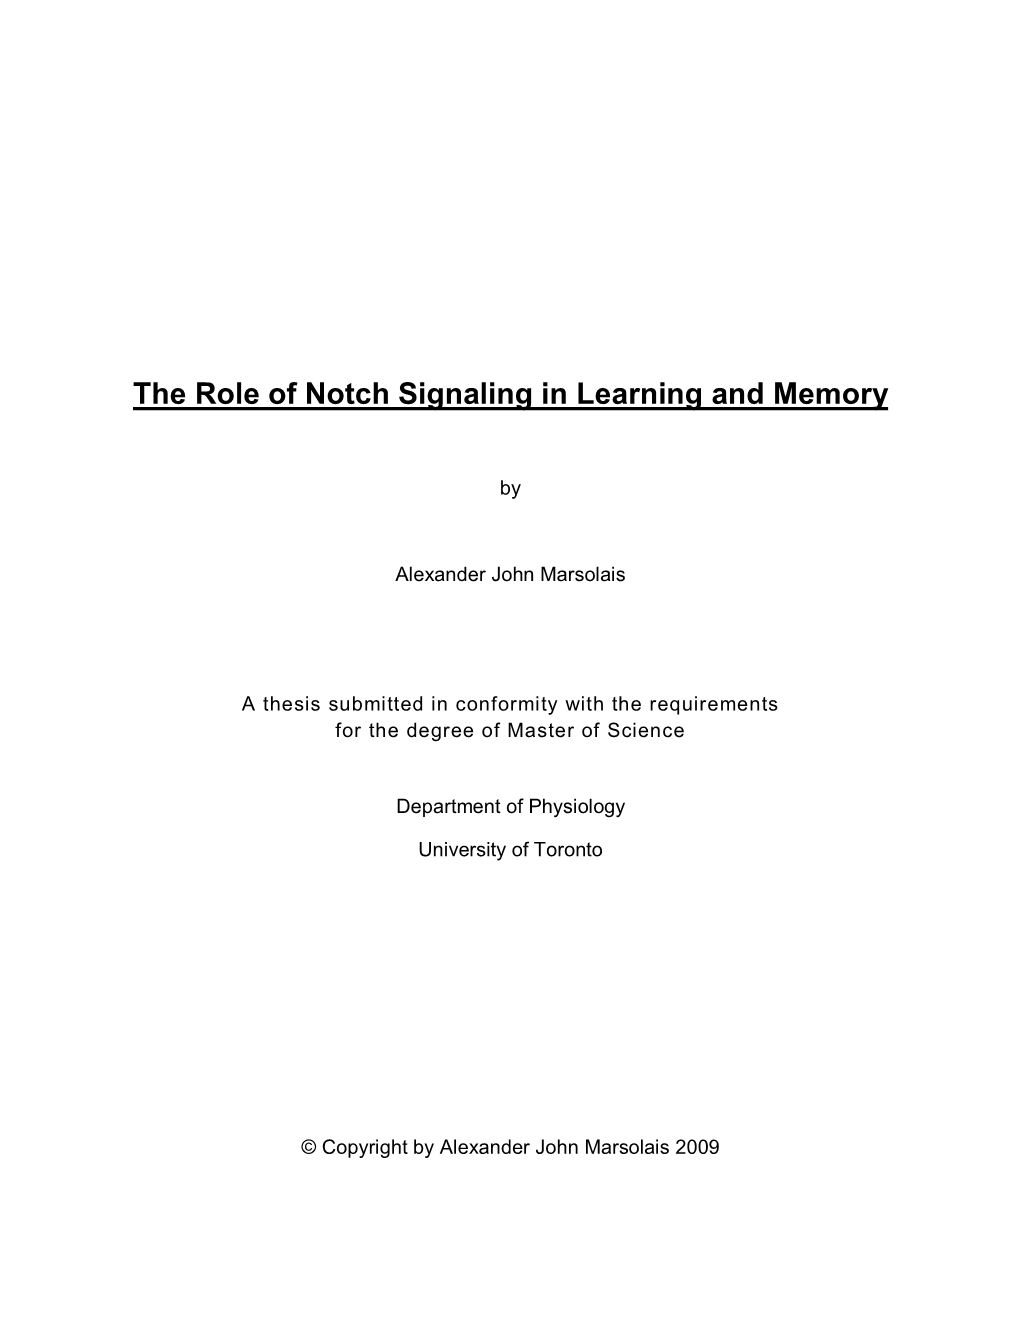 The Role of Notch Signaling in Learning and Memory